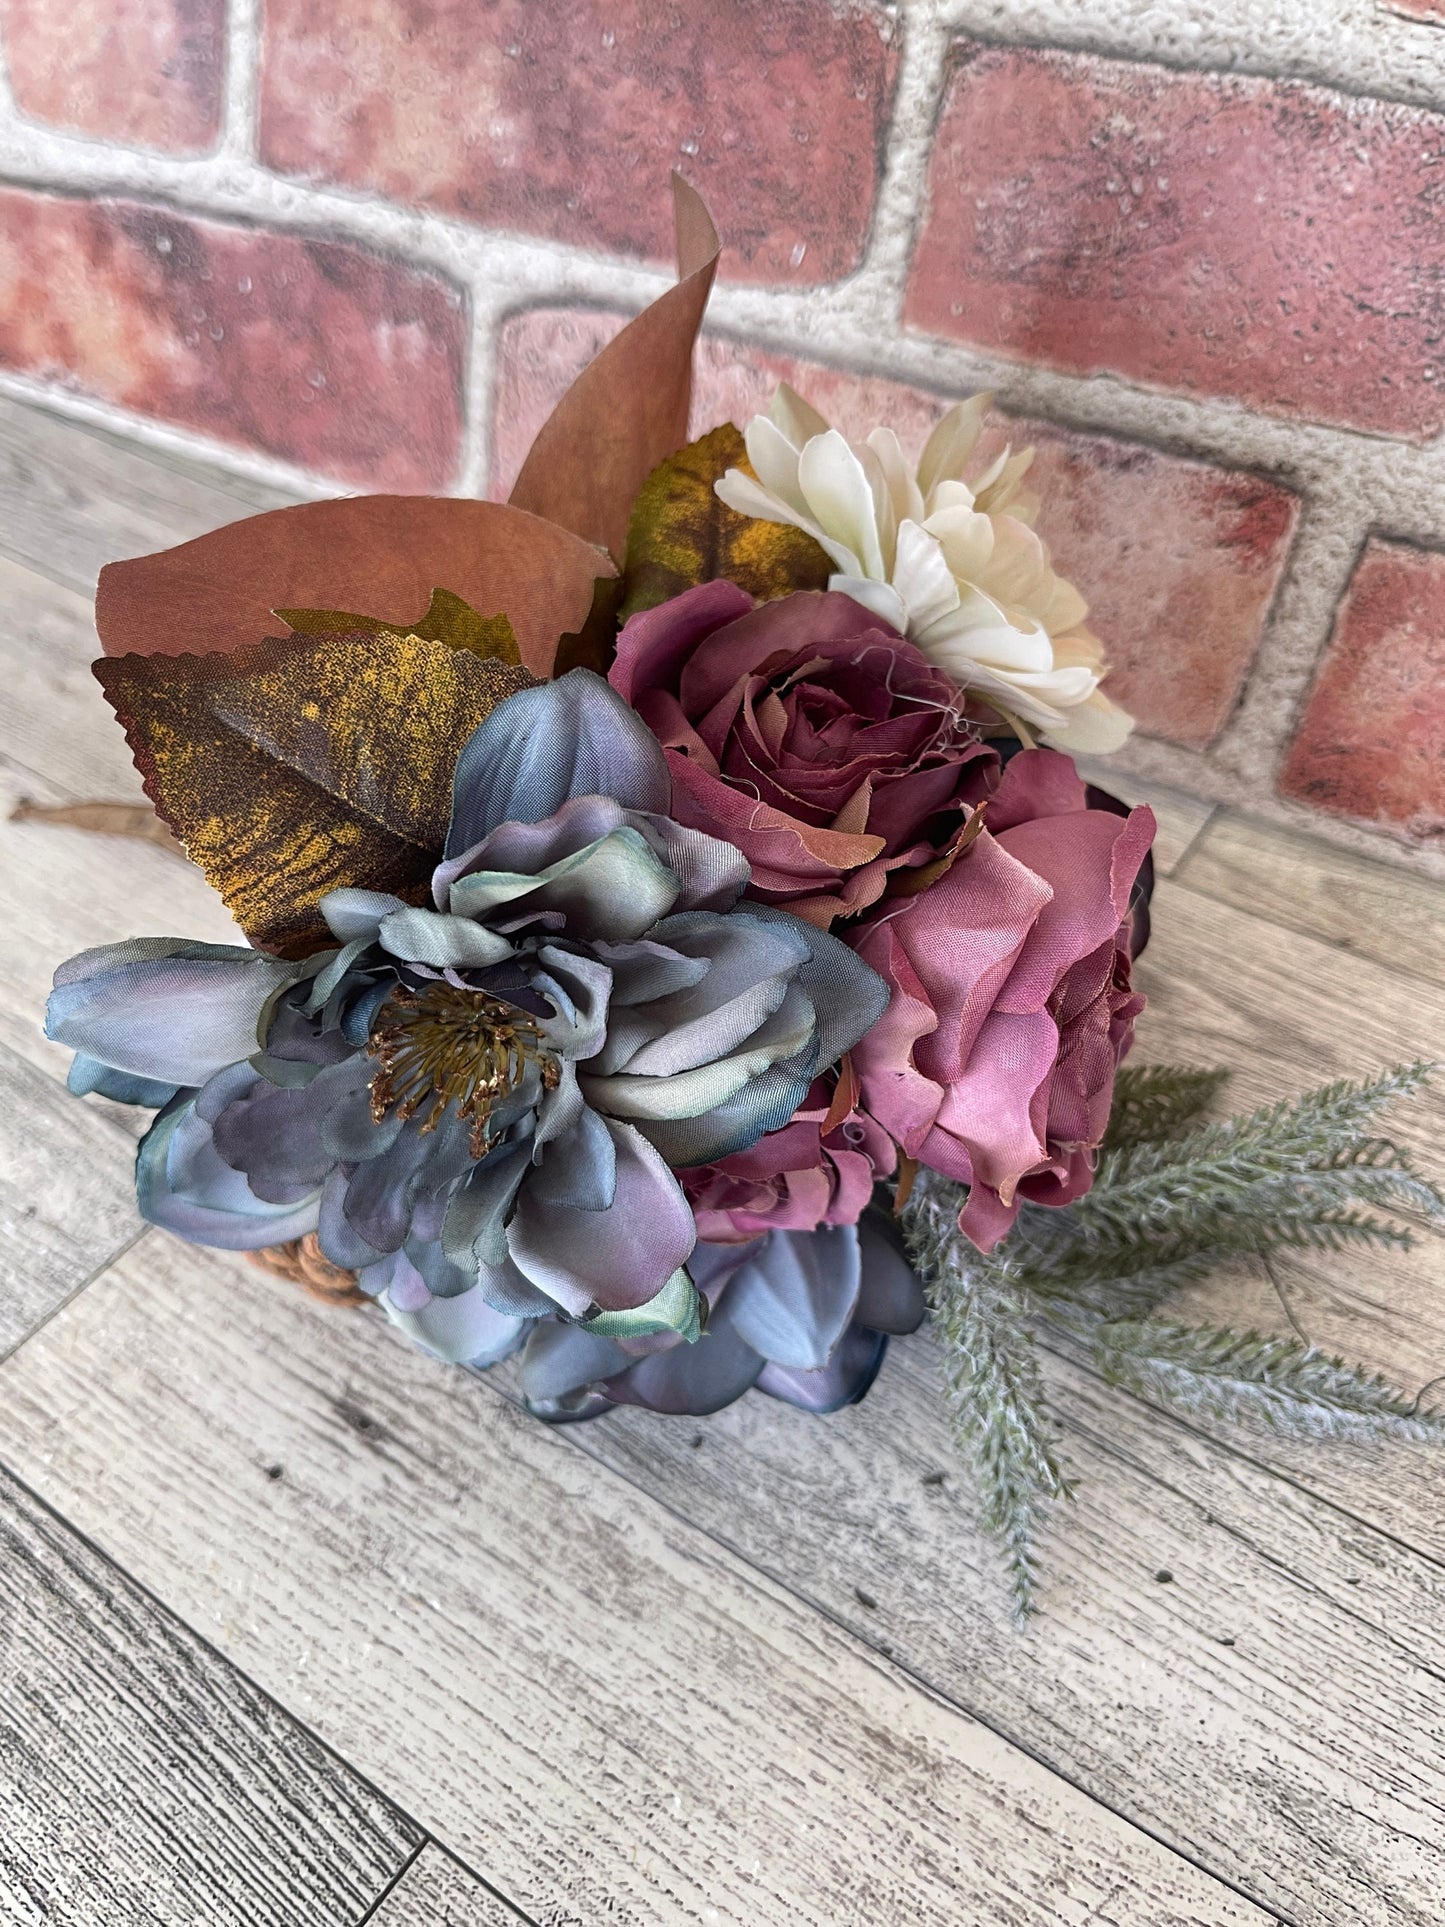 Blue Dahlia Lavender Rose Floral Bouquet Bunch, Wedding Bouquet, Floral Supplies, Wreath Greenery, Floral Greenery, Picks, Craft Supply,